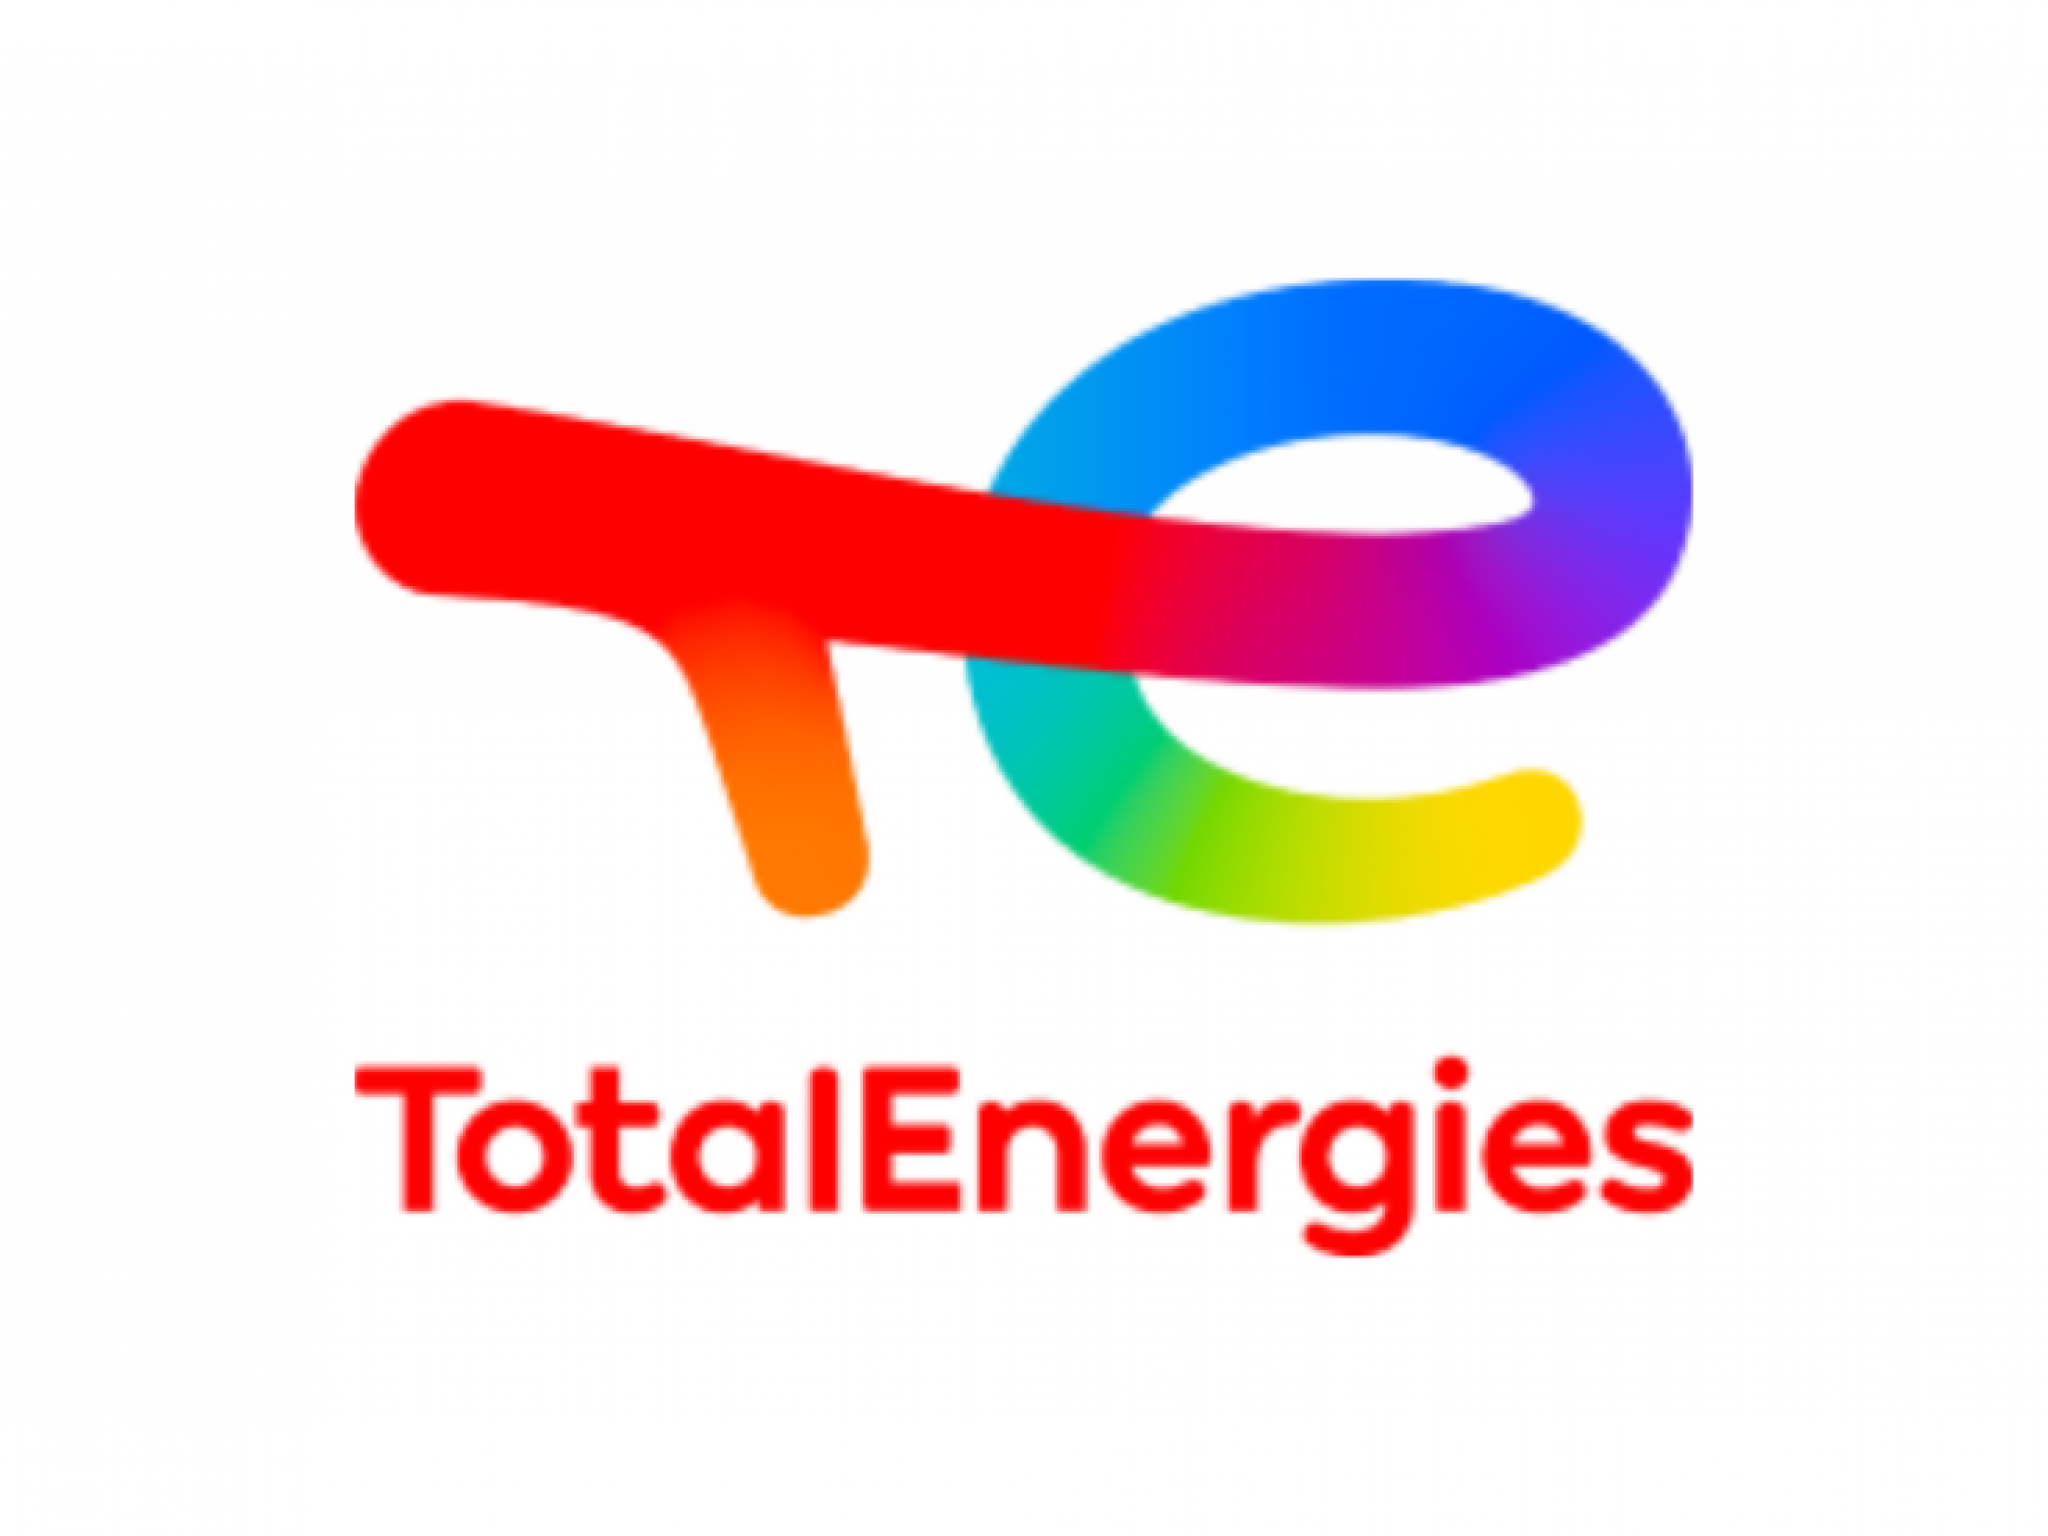  whats-going-on-with-totalenergies-shares-friday 